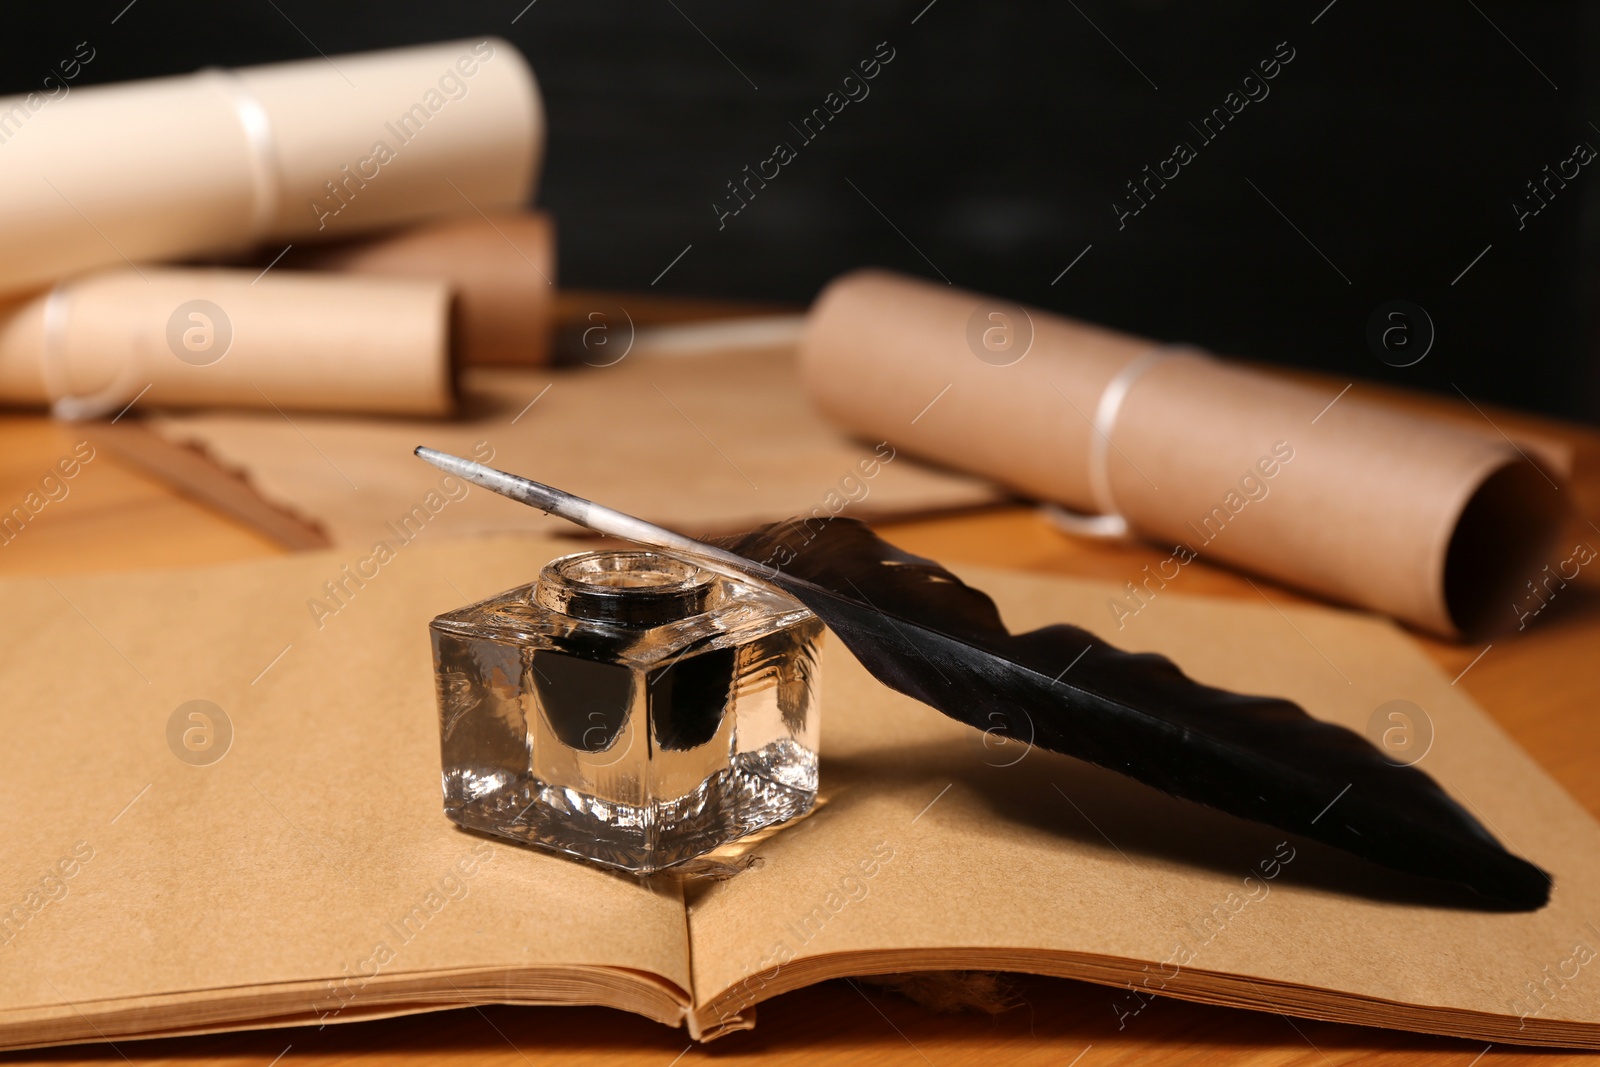 Photo of Feather pen, inkwell and open notebook on wooden table